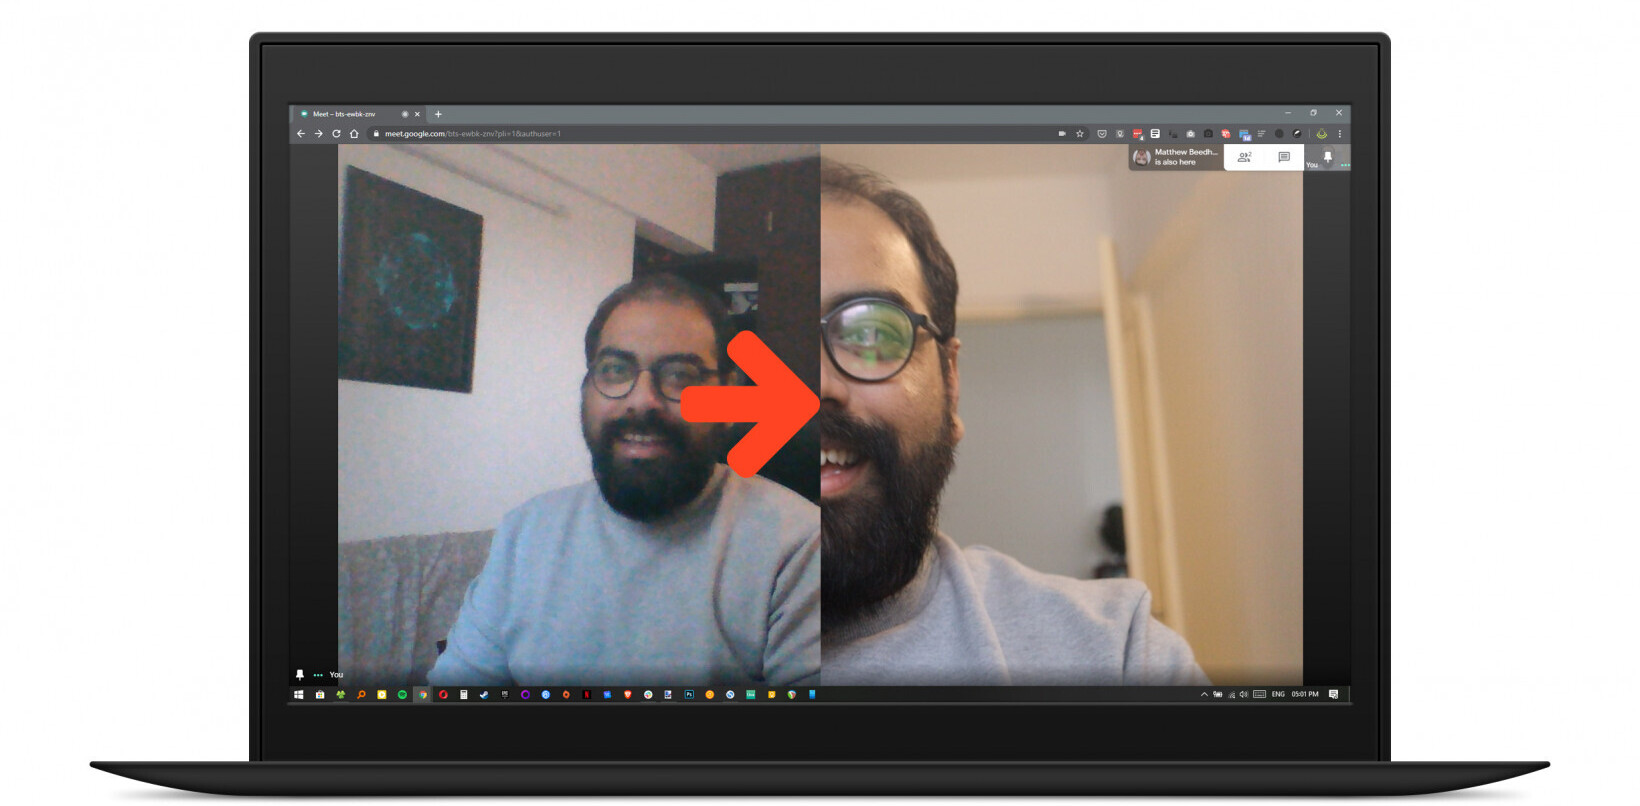 Screw shitty webcams, I’m using a DSLR for all my video conferences now